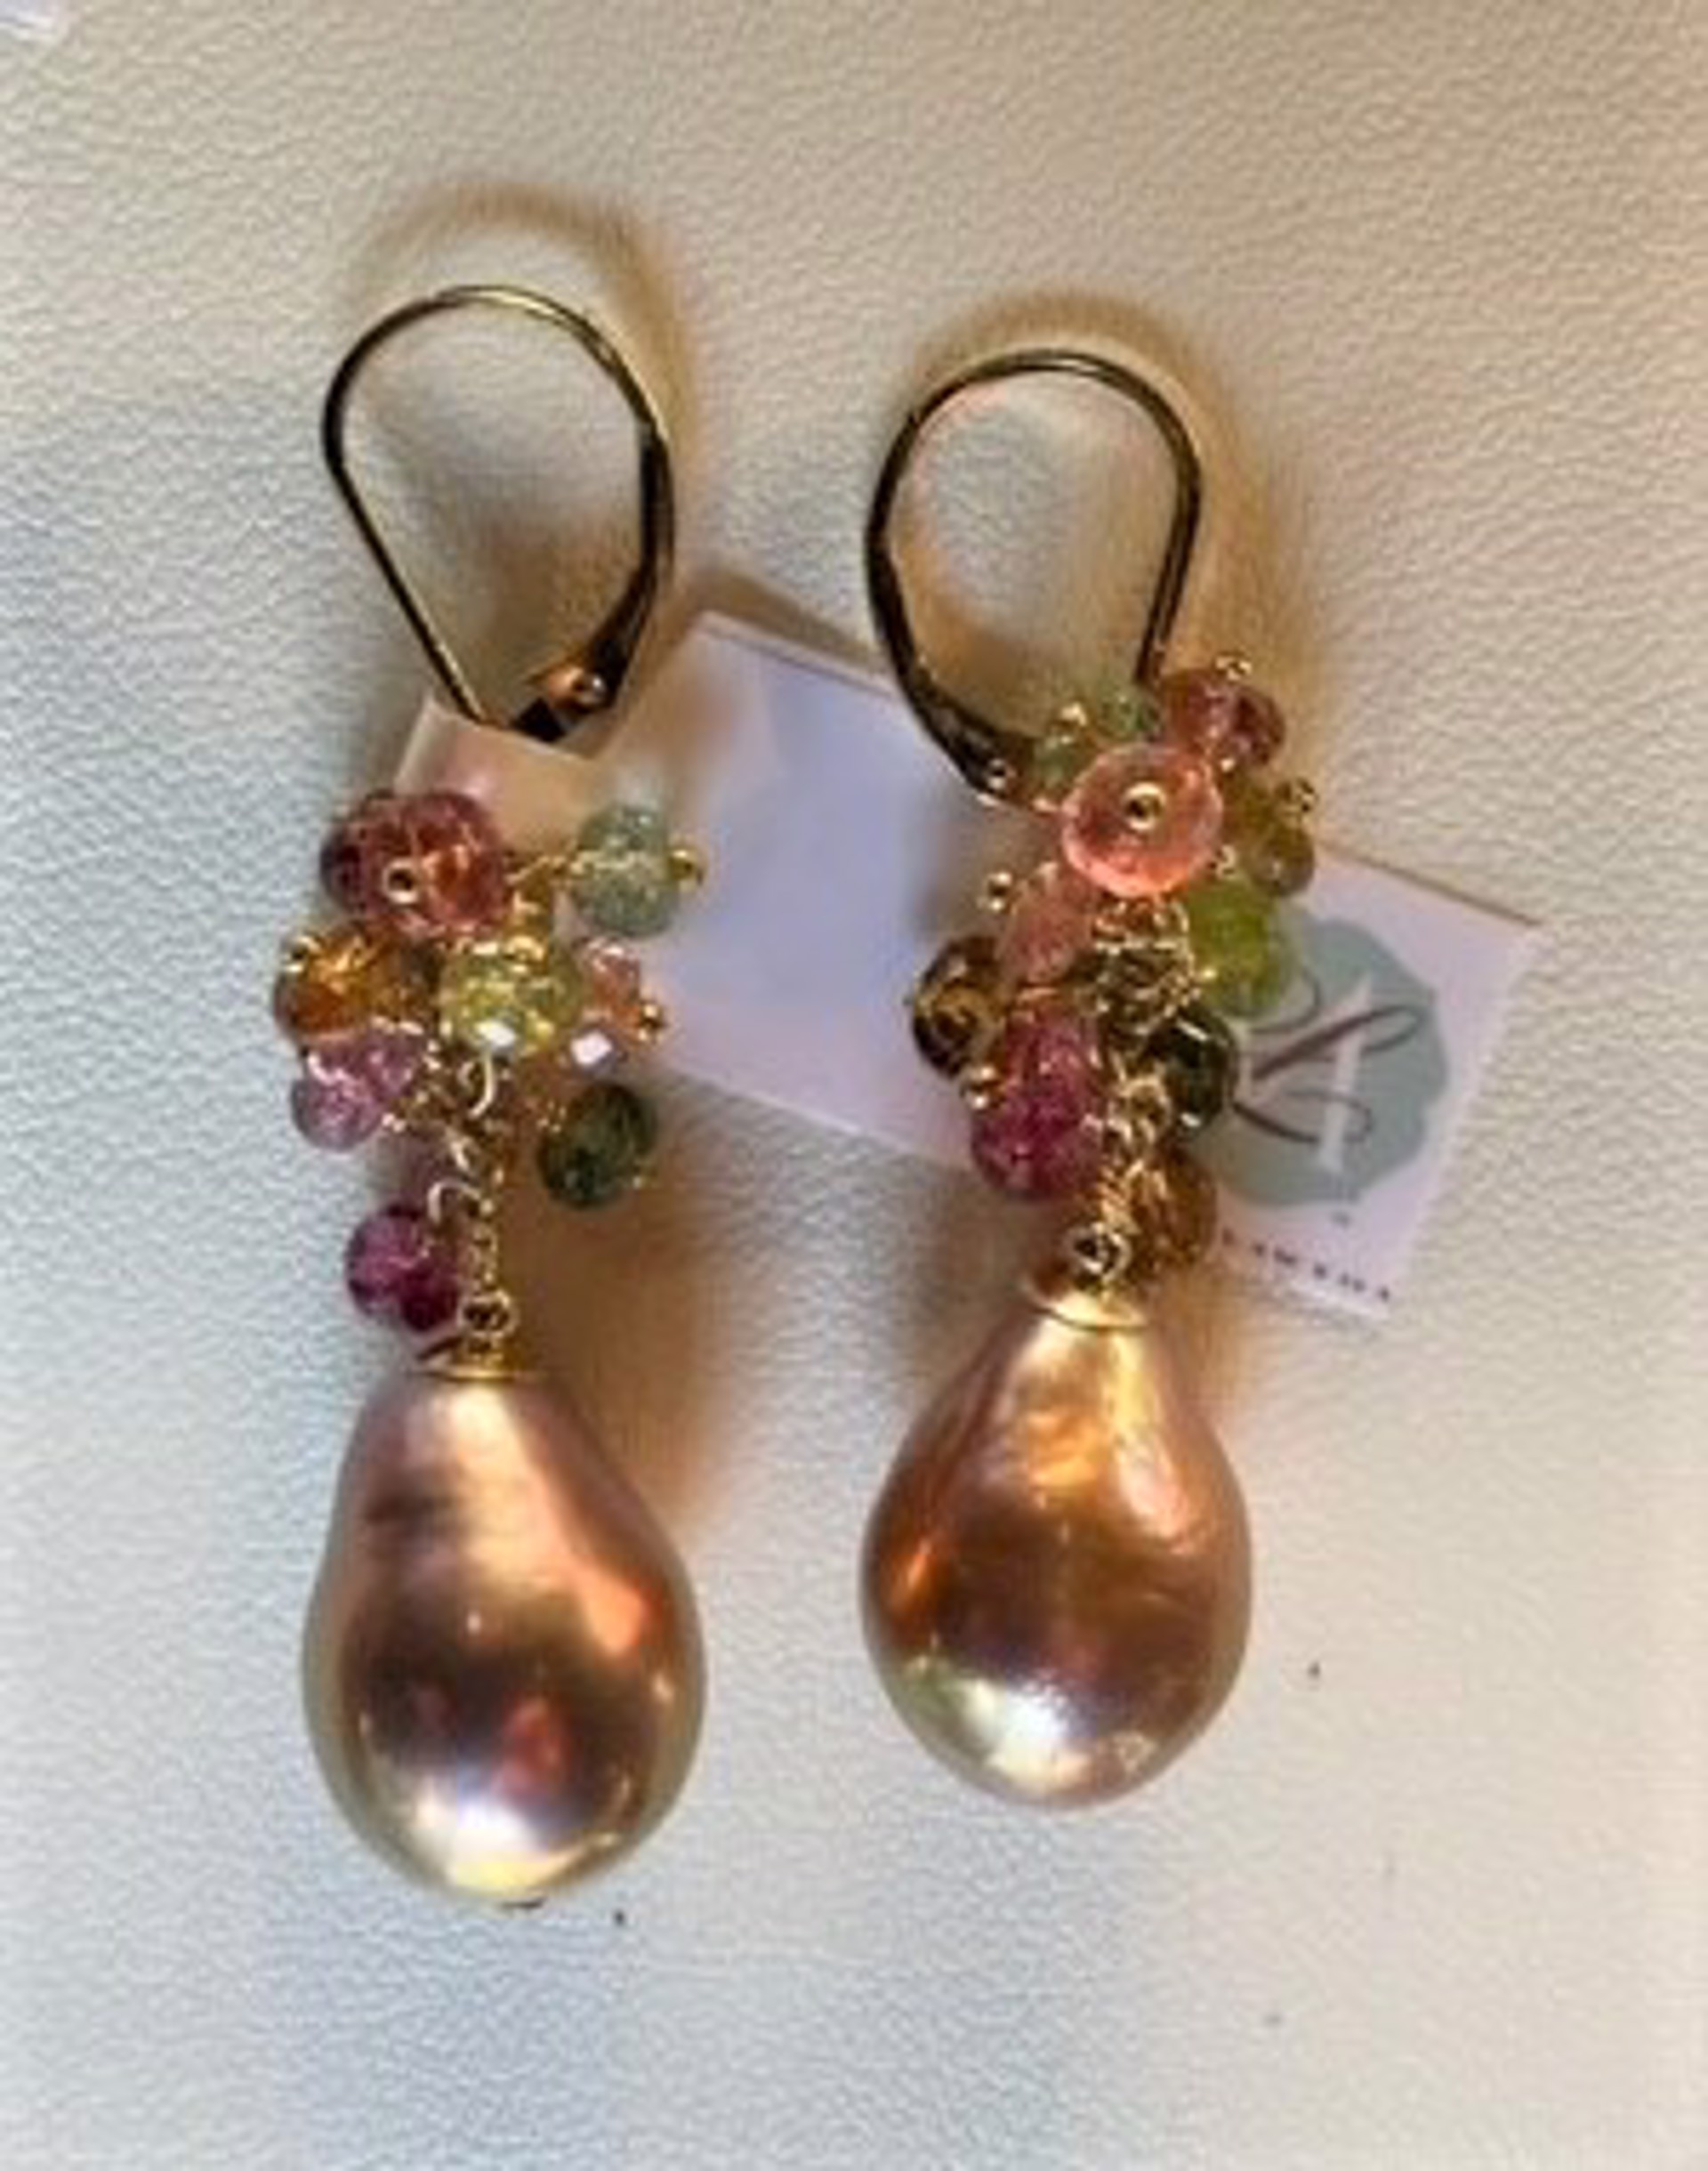 Clusters of AAA tourmaline rondels with all-natural color pink Edison pearls in 14k gold-filled by Melinda Lawton Jewelry